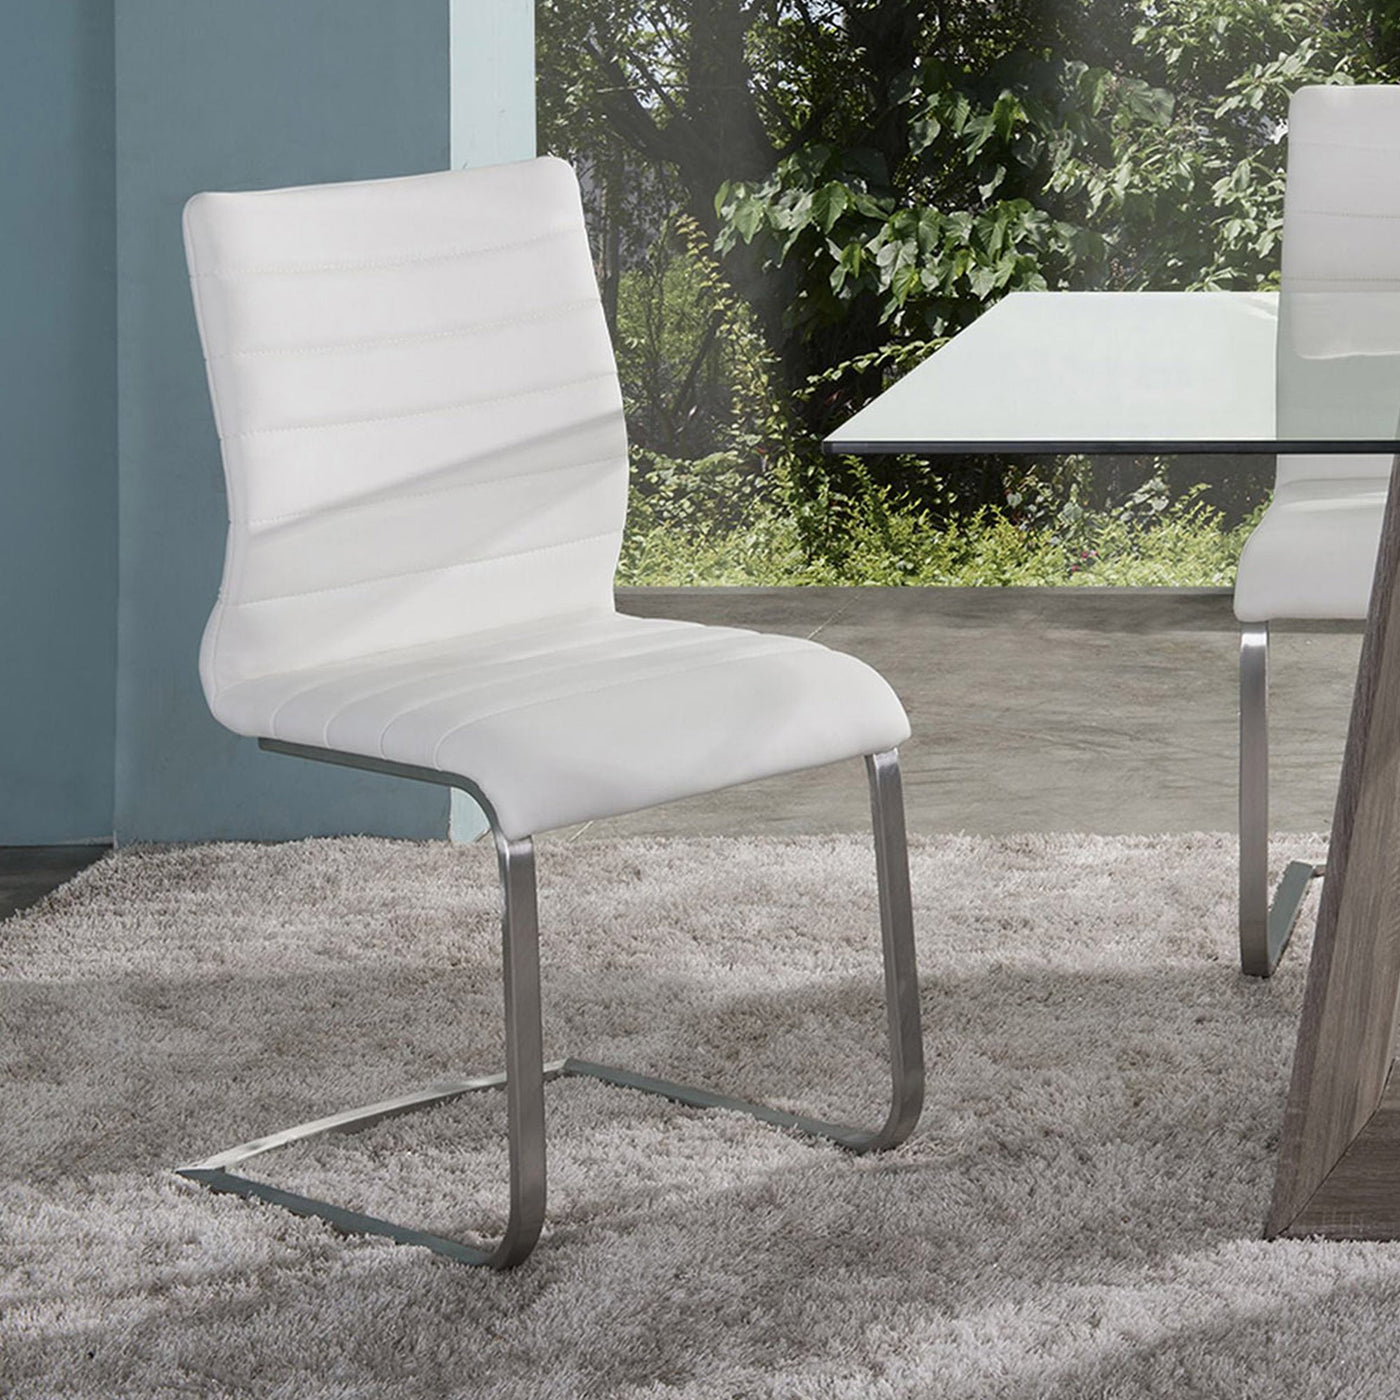 Fusion Dining Chair Set of 2